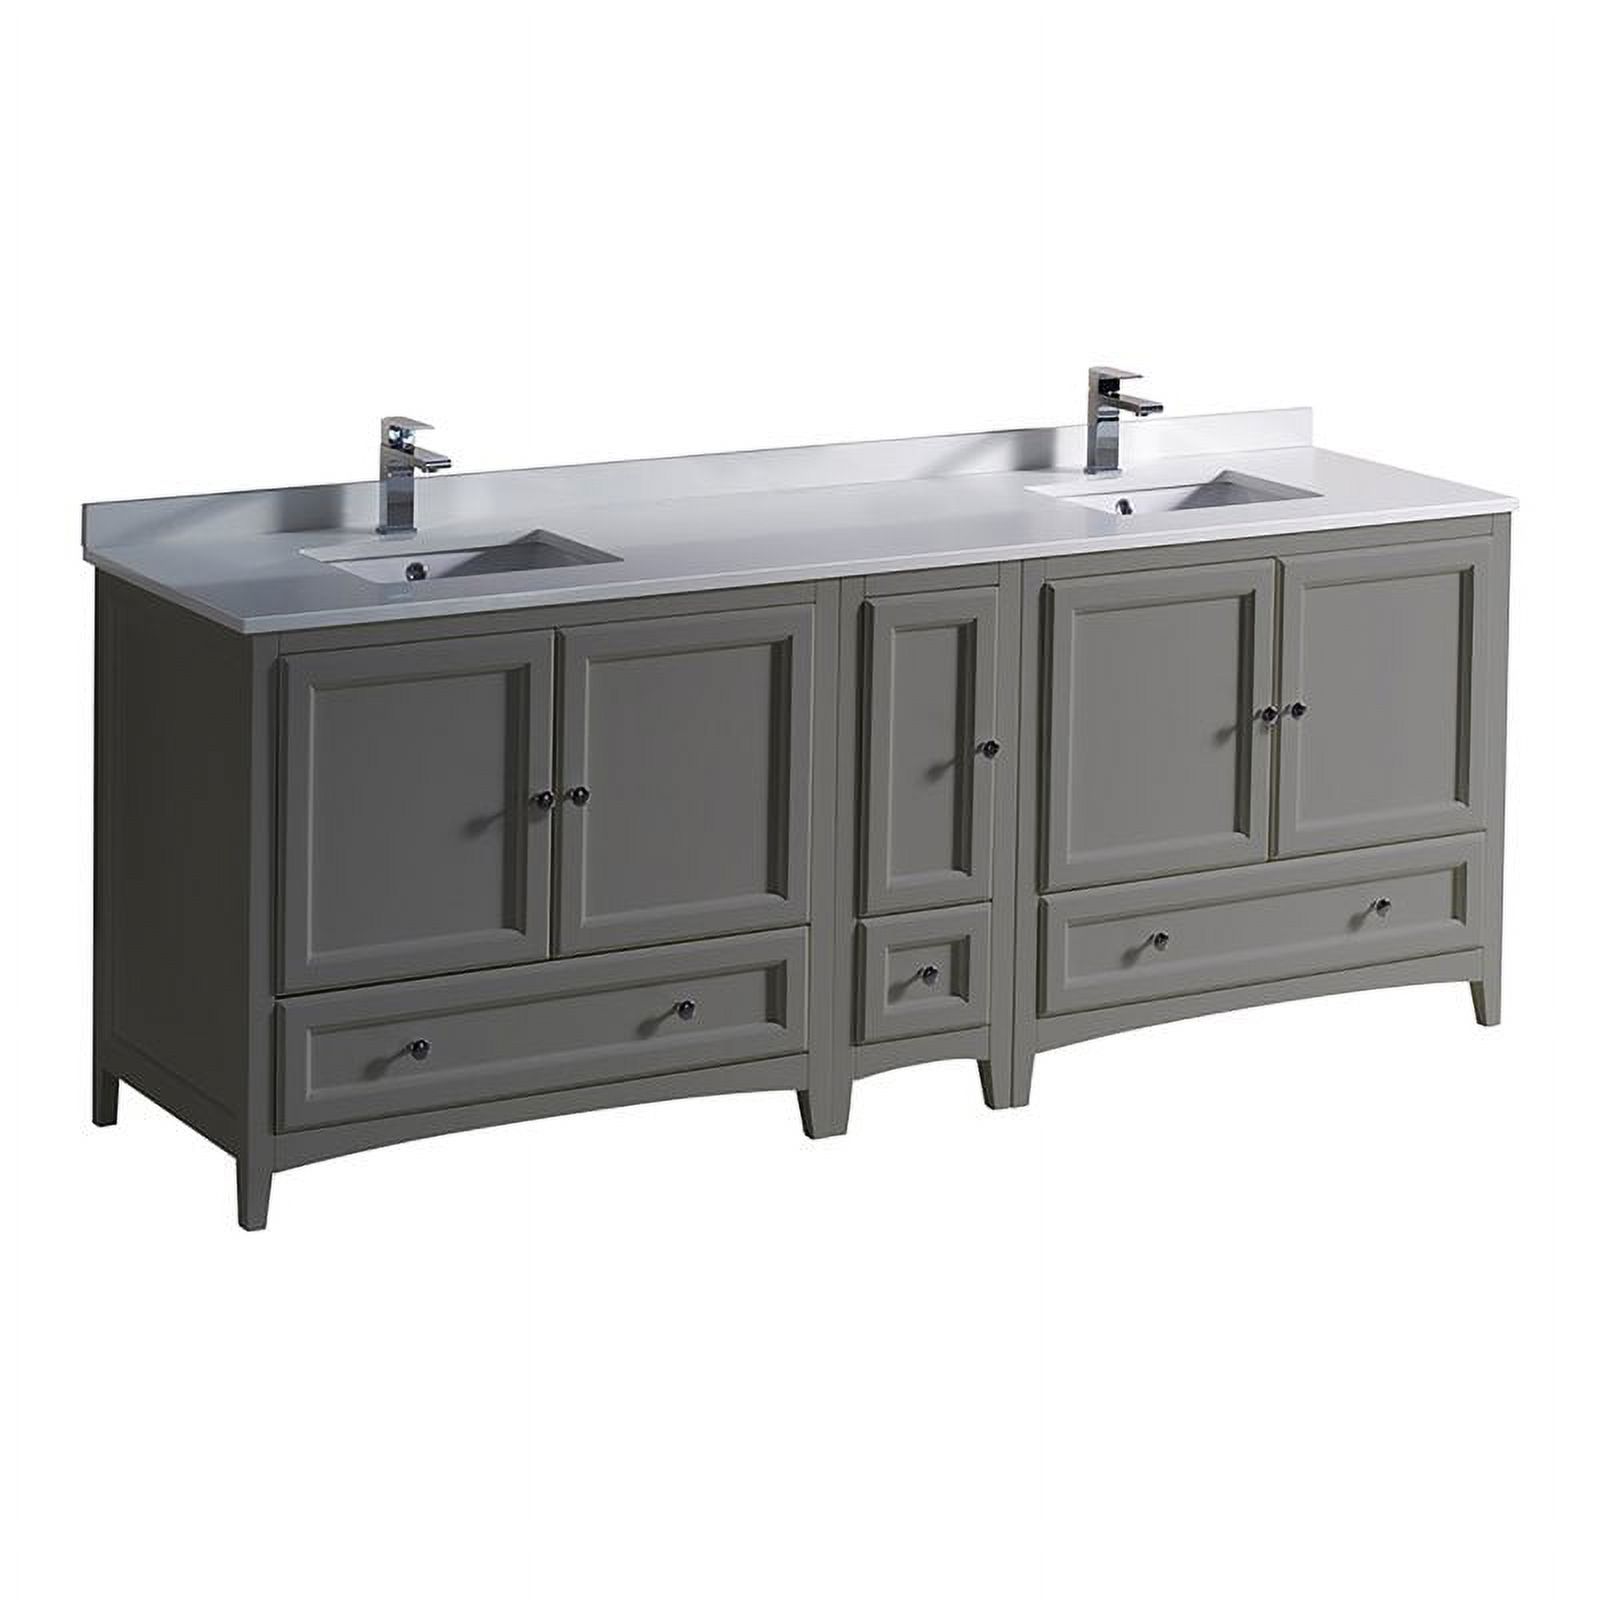 Fresca Oxford 72" Double Sinks Traditional Wood Bathroom Cabinet in Gray - image 1 of 3